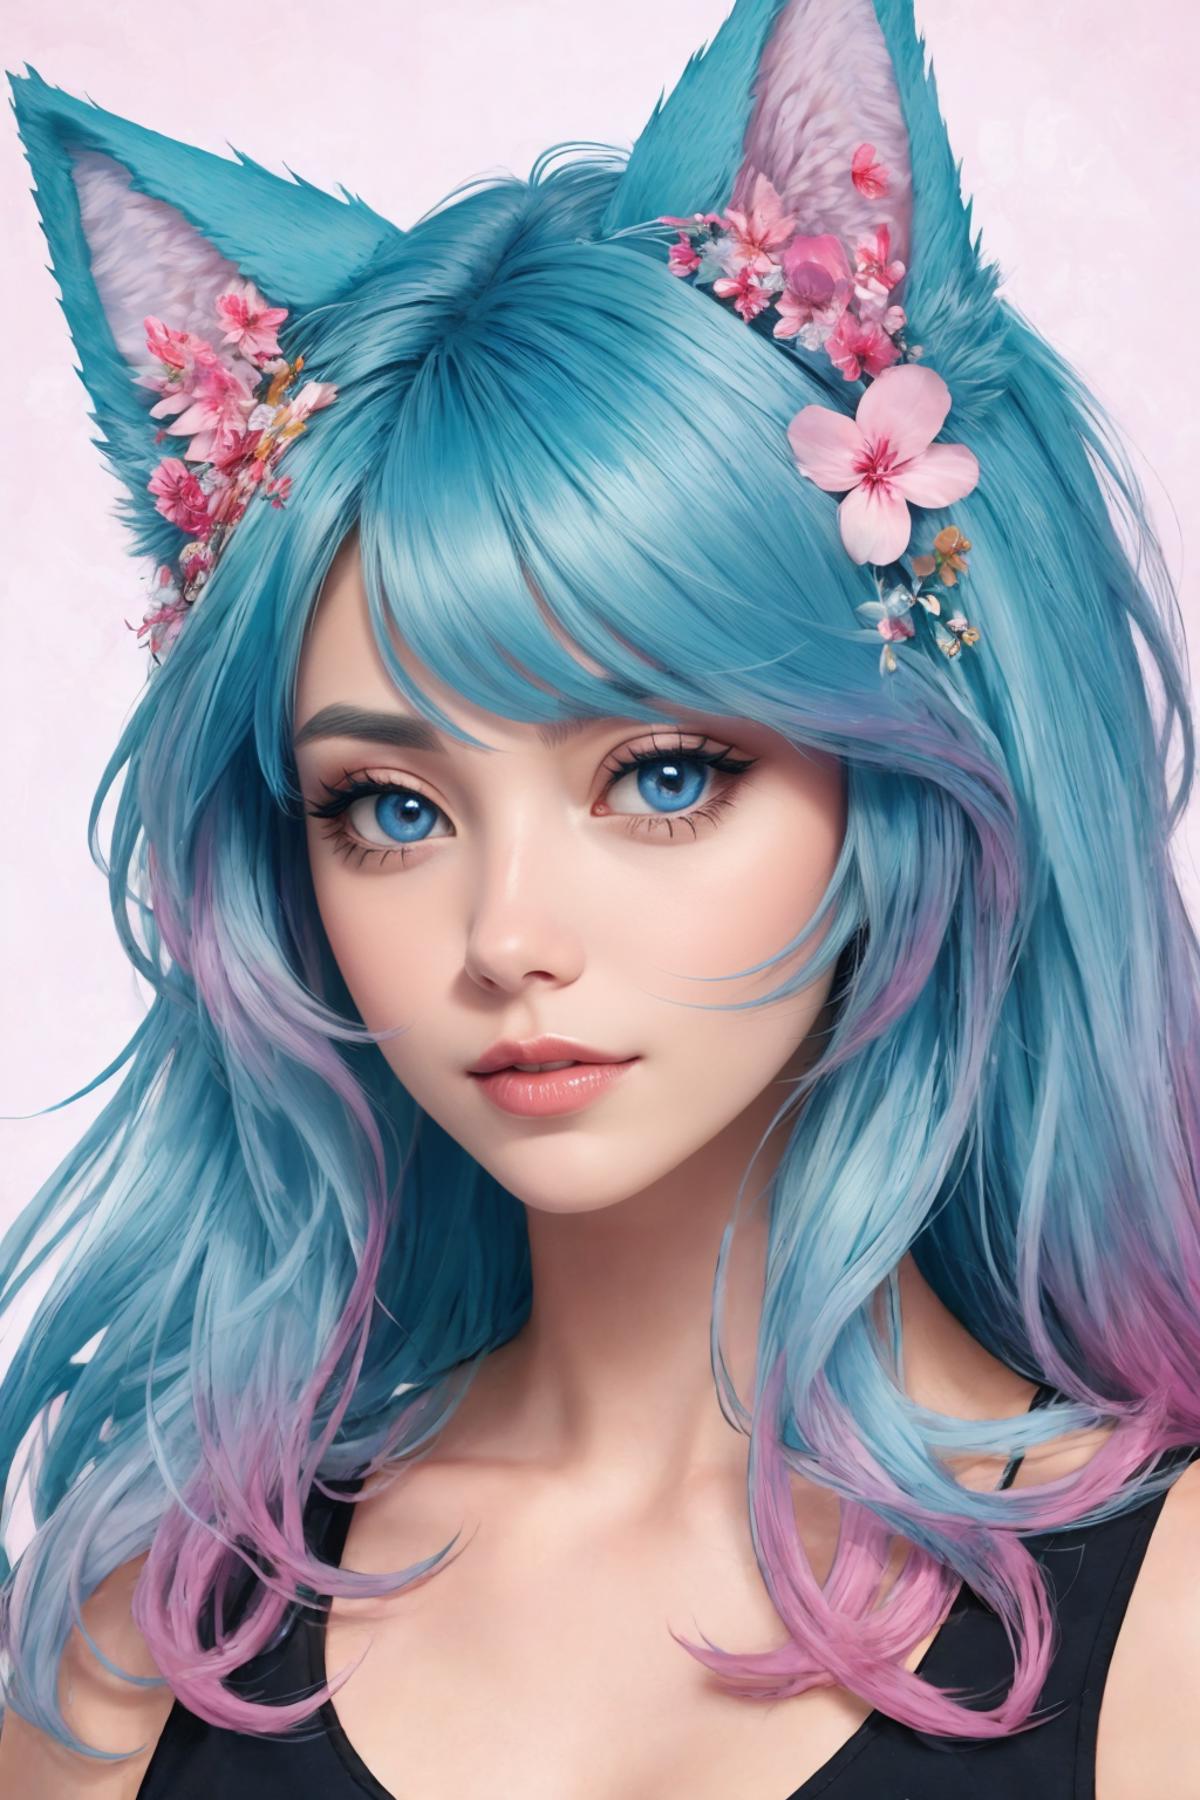 AI model image by Looker